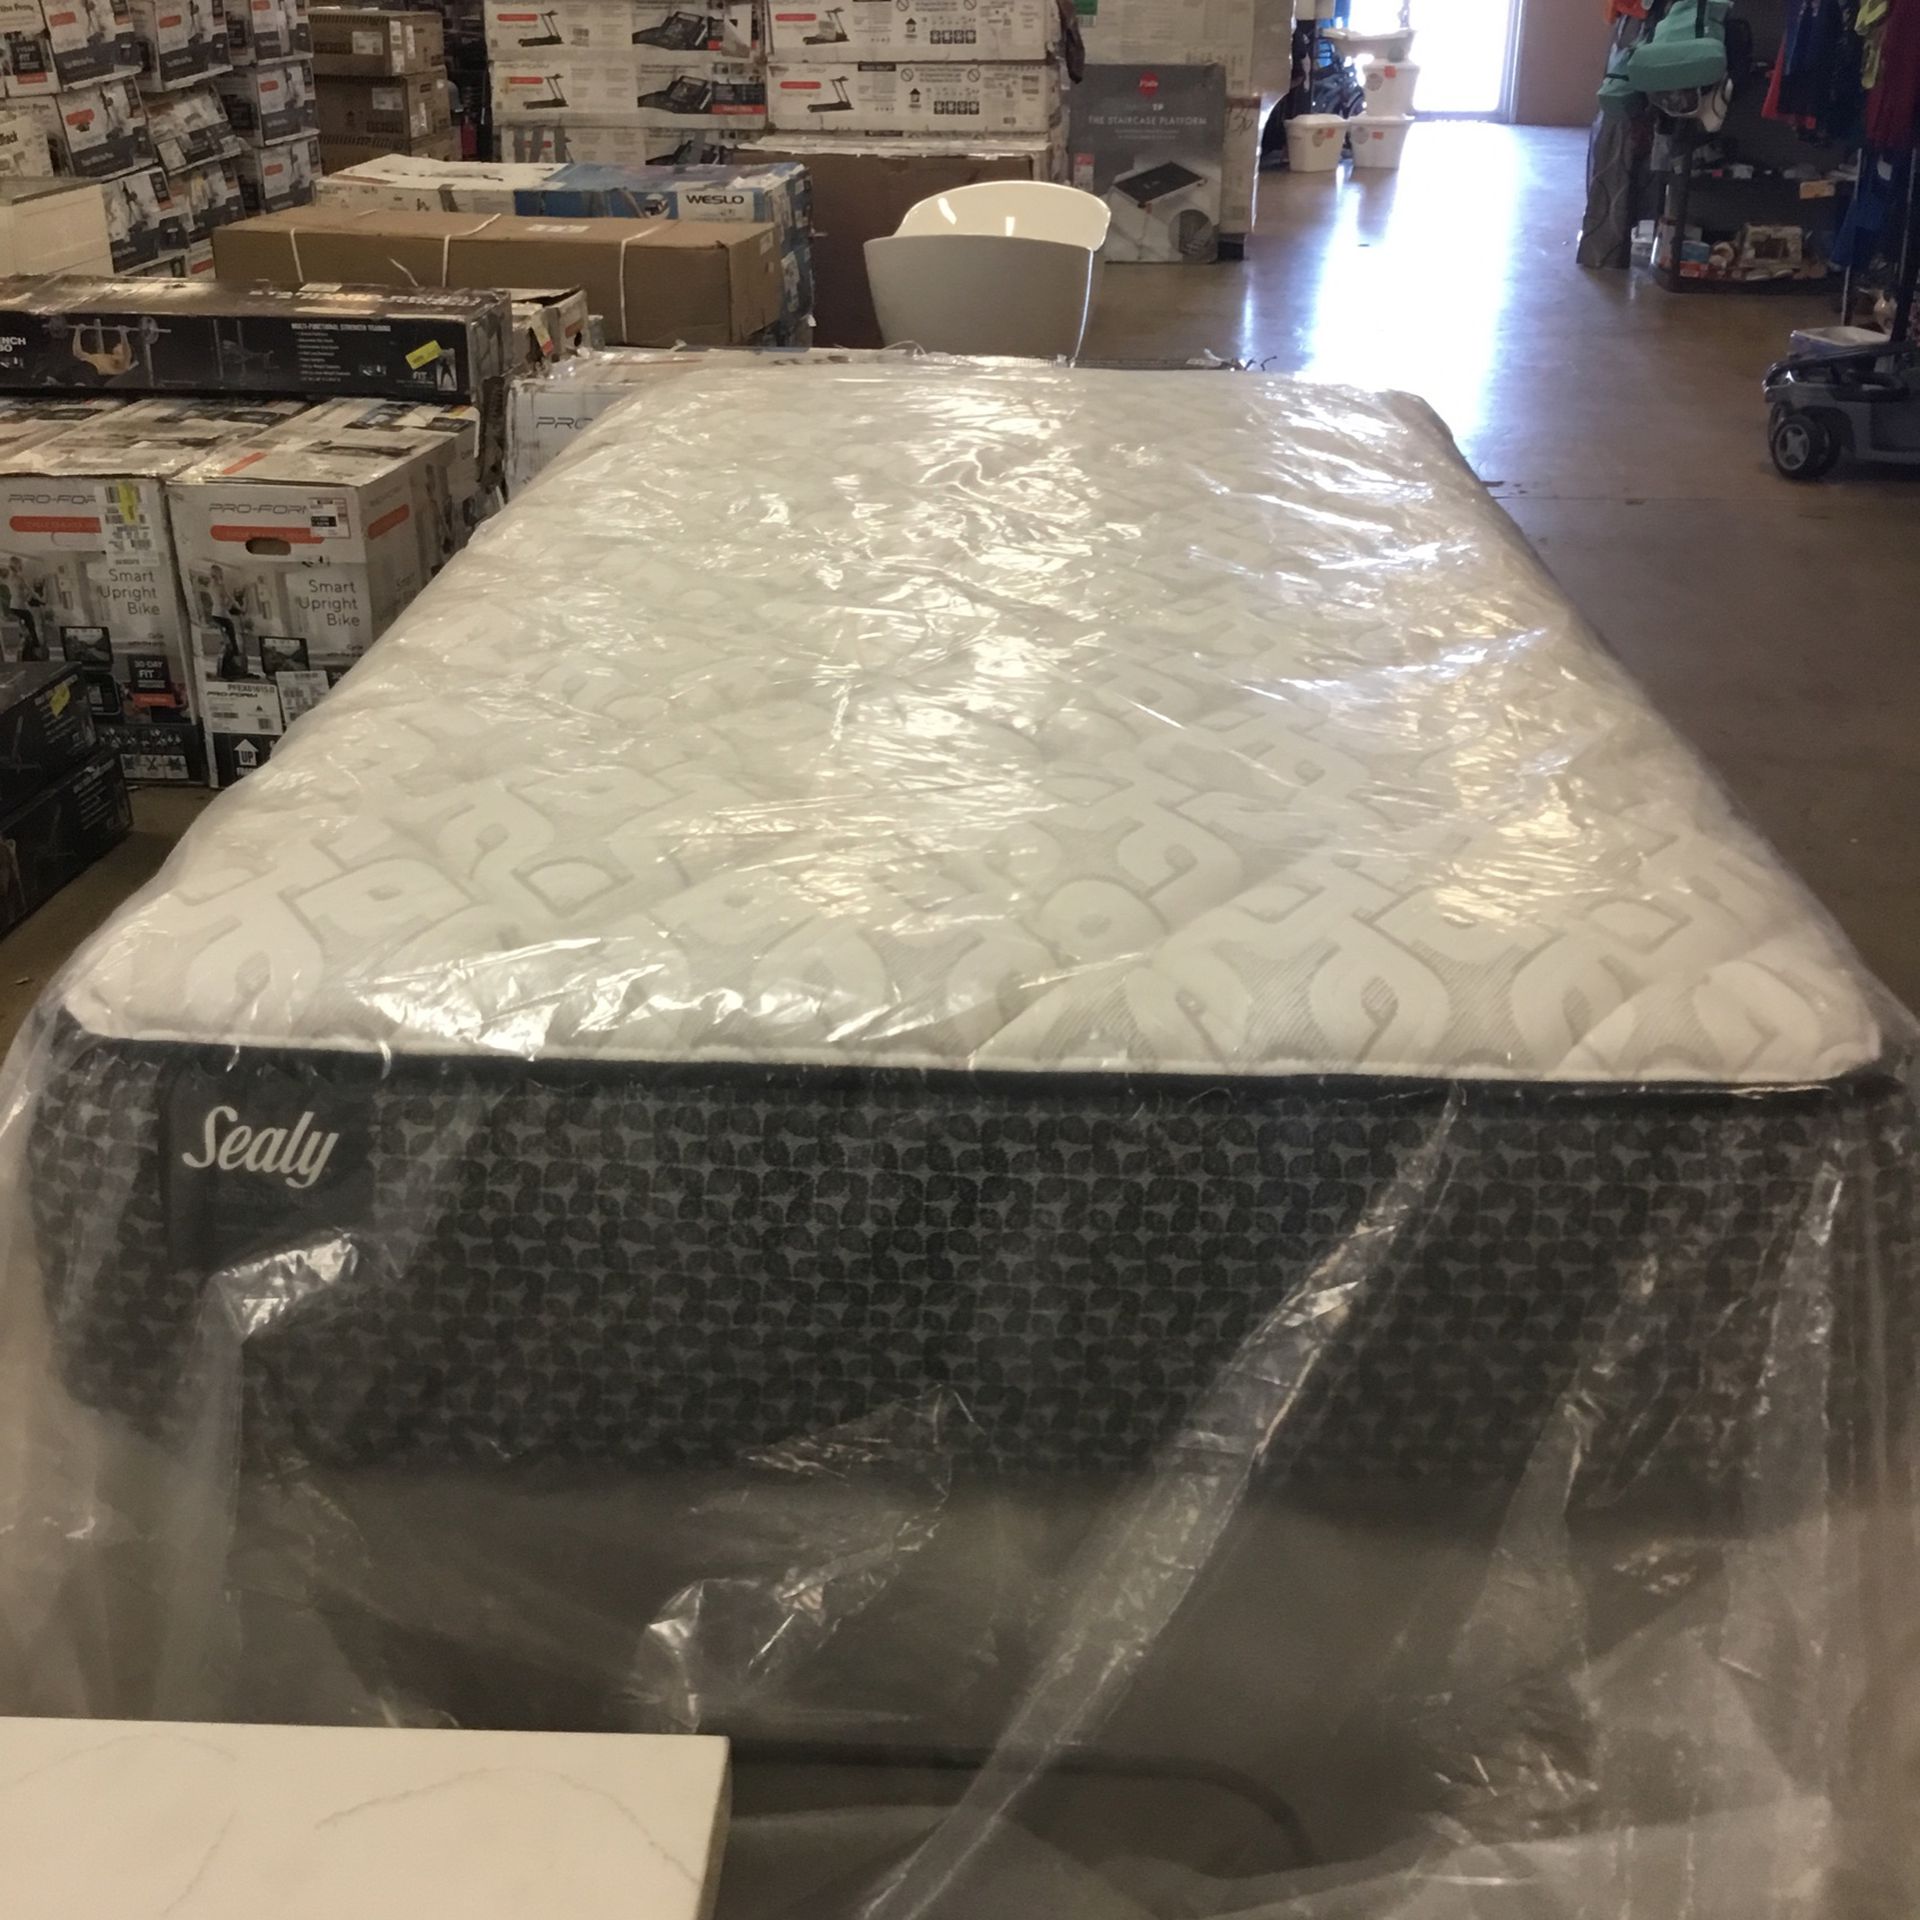 Sealy Essentials Twin Mattress for Sale in Indianapolis, IN - OfferUp